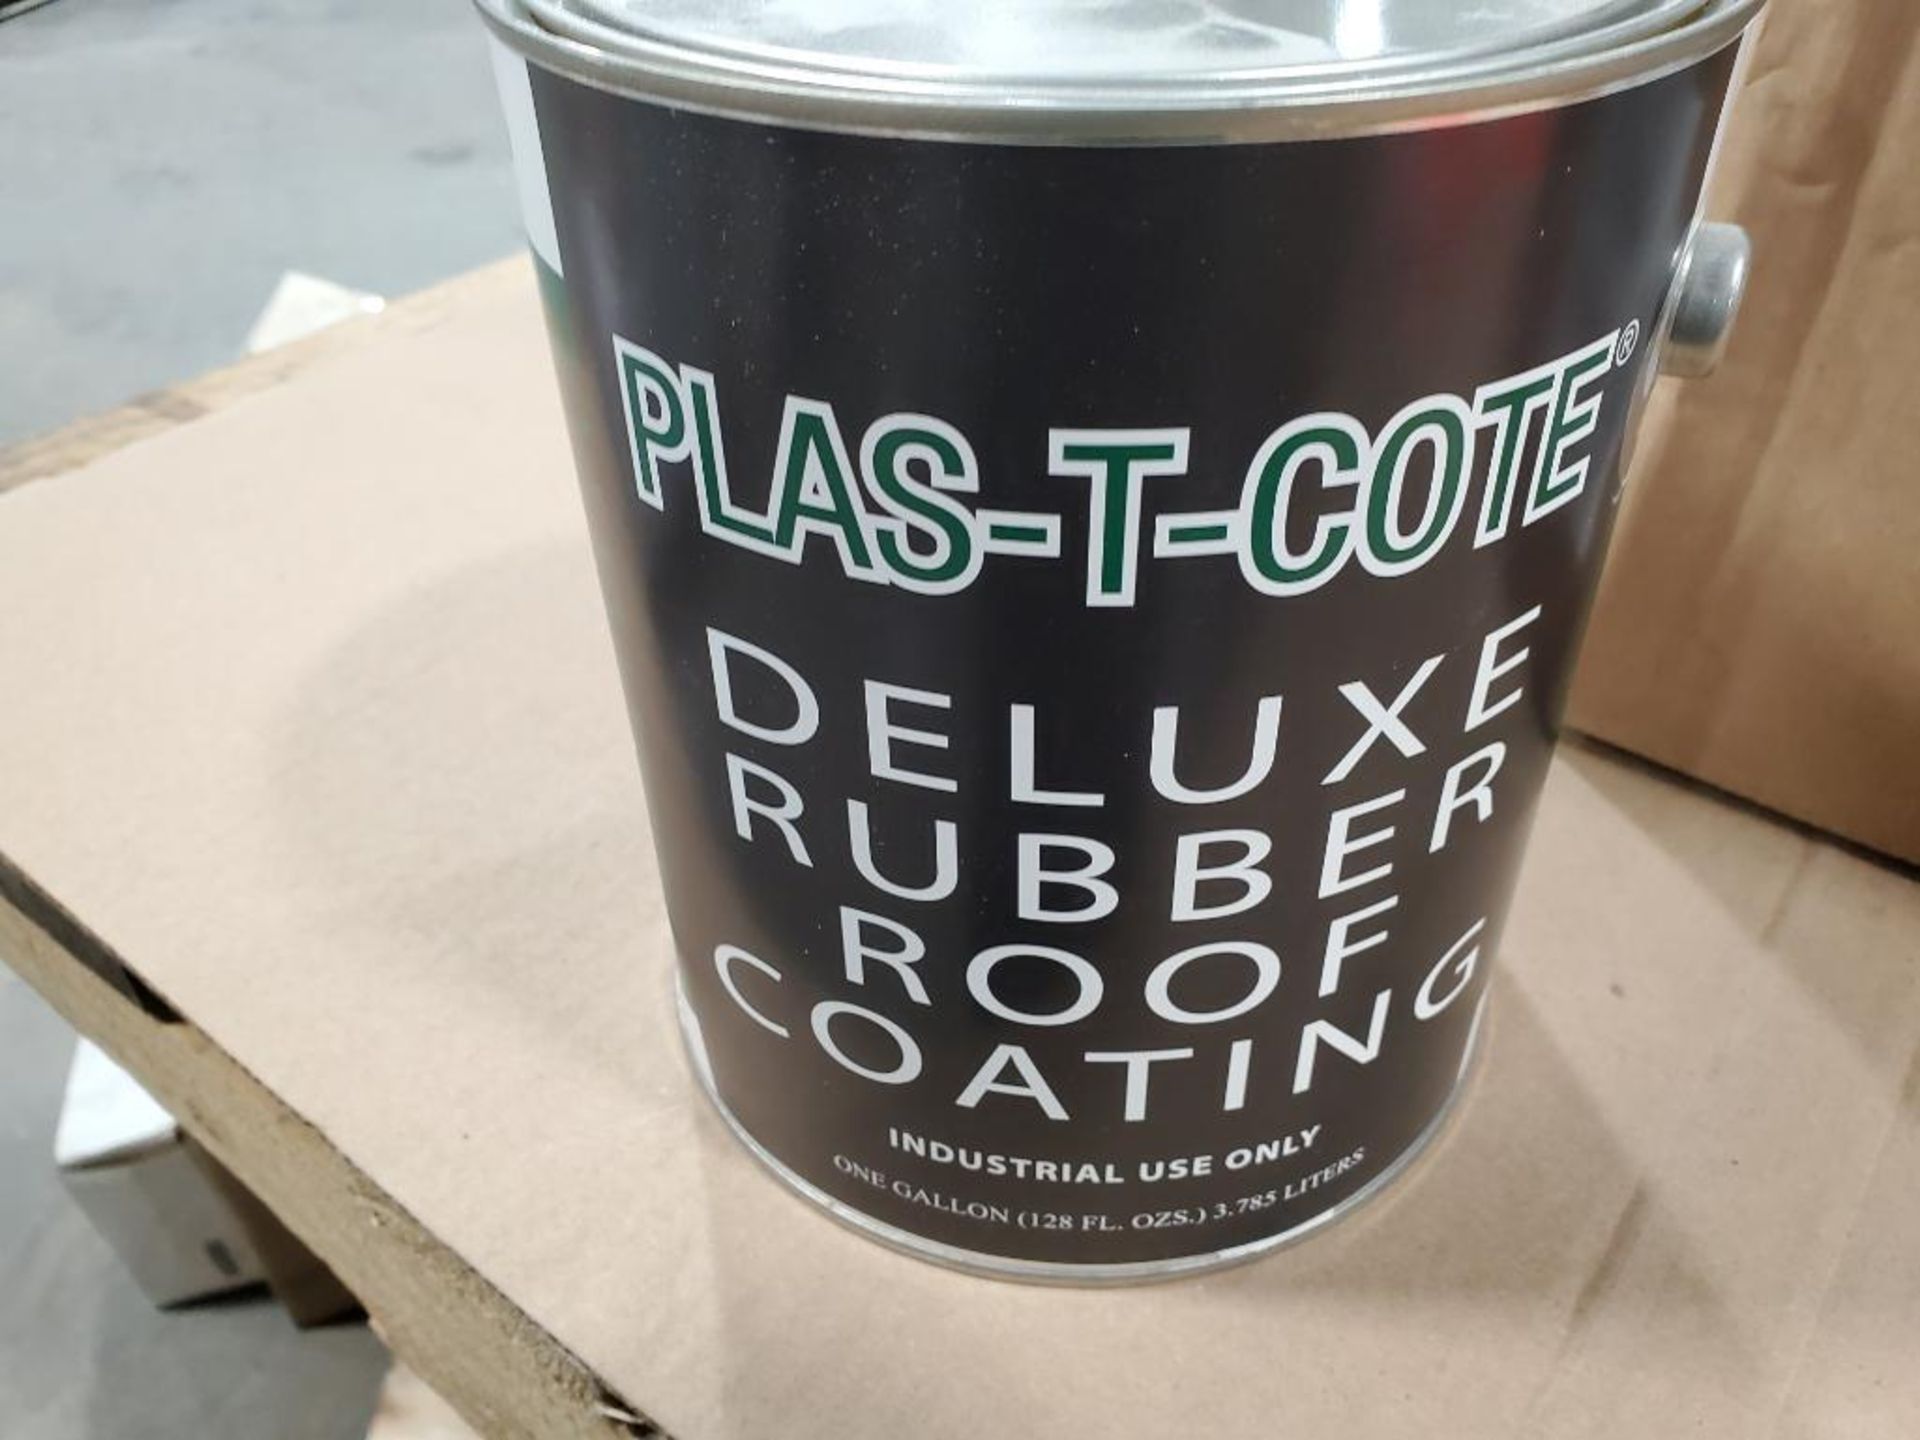 Qty 8 Gallon - Plas-T-Cote deluxe rubber roof coating. 44128. - Image 2 of 3